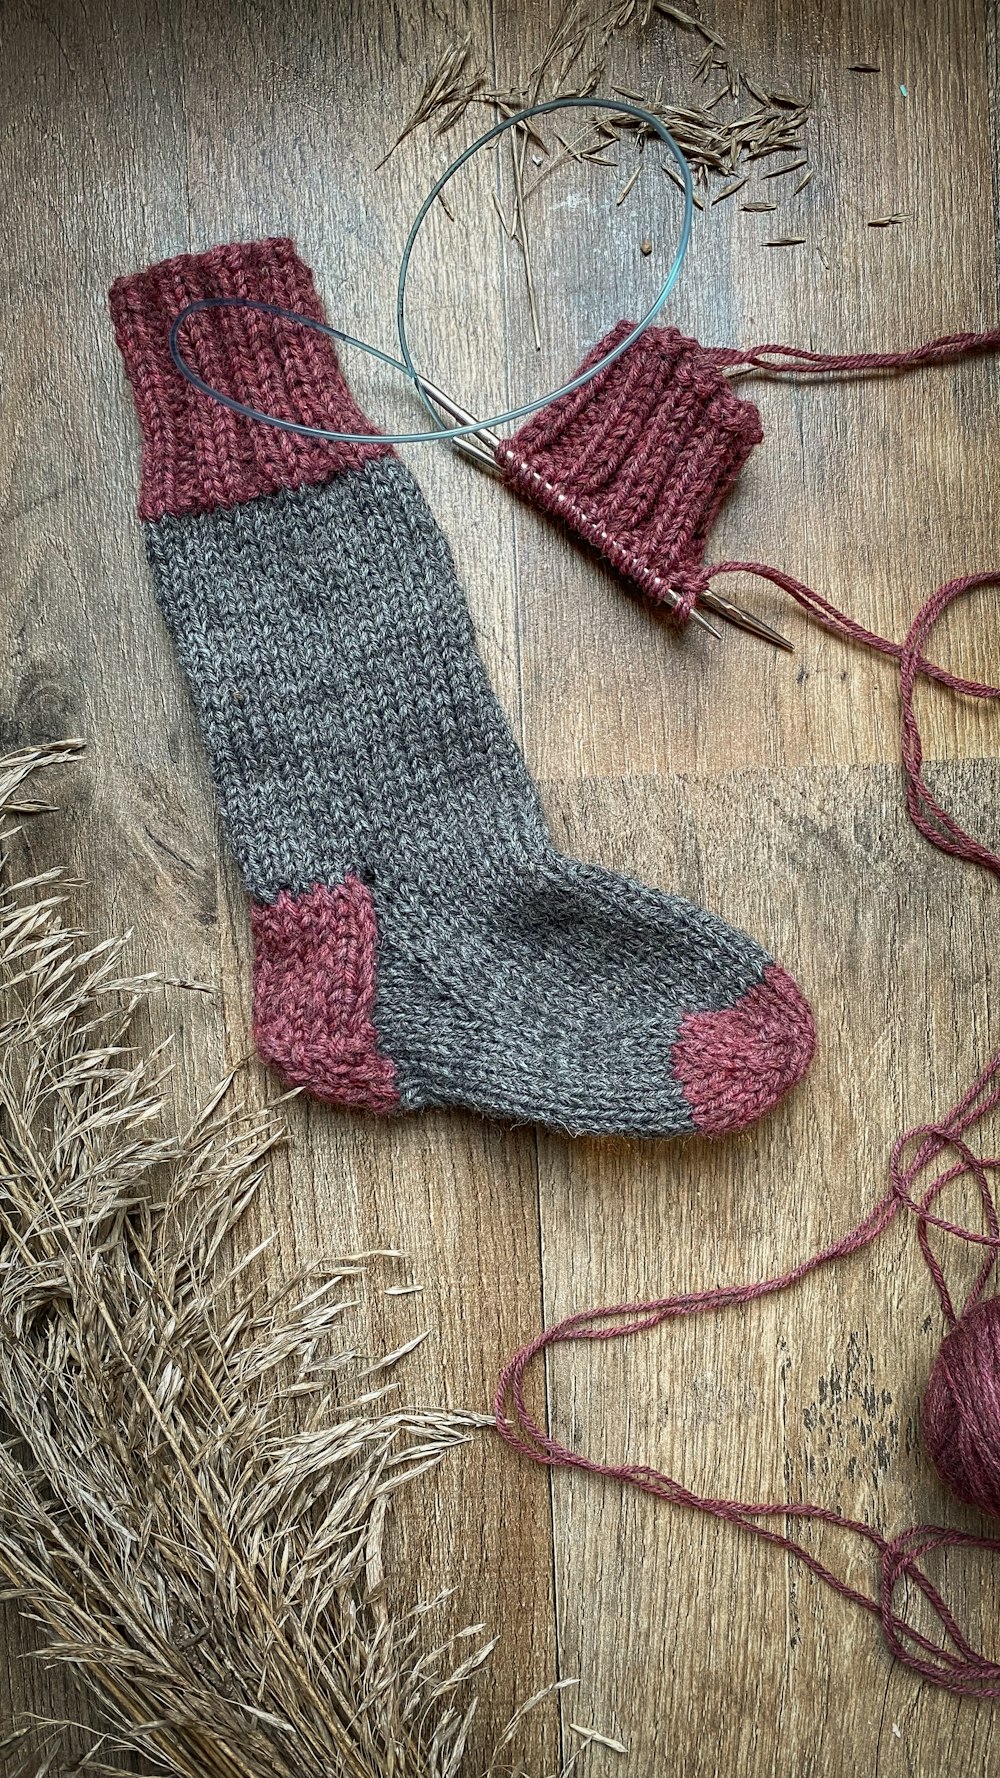 a pair of knitted socks sitting on top of a wooden floor